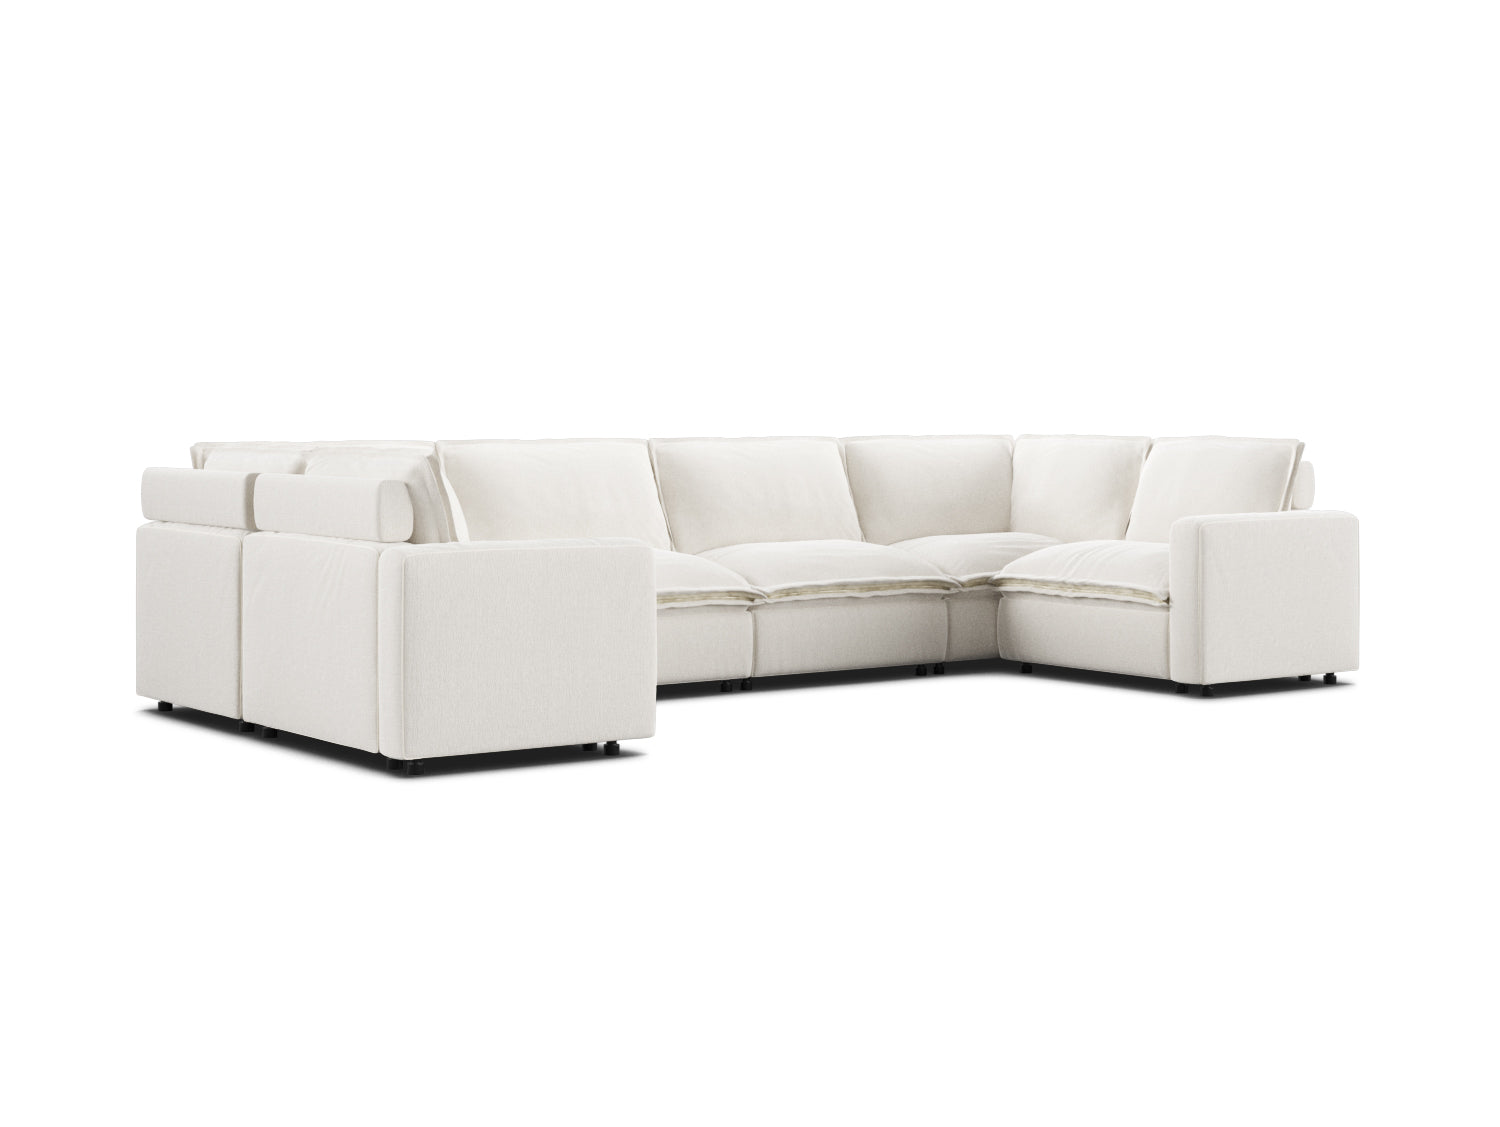 U-shaped sectional couch, modular, in white linen